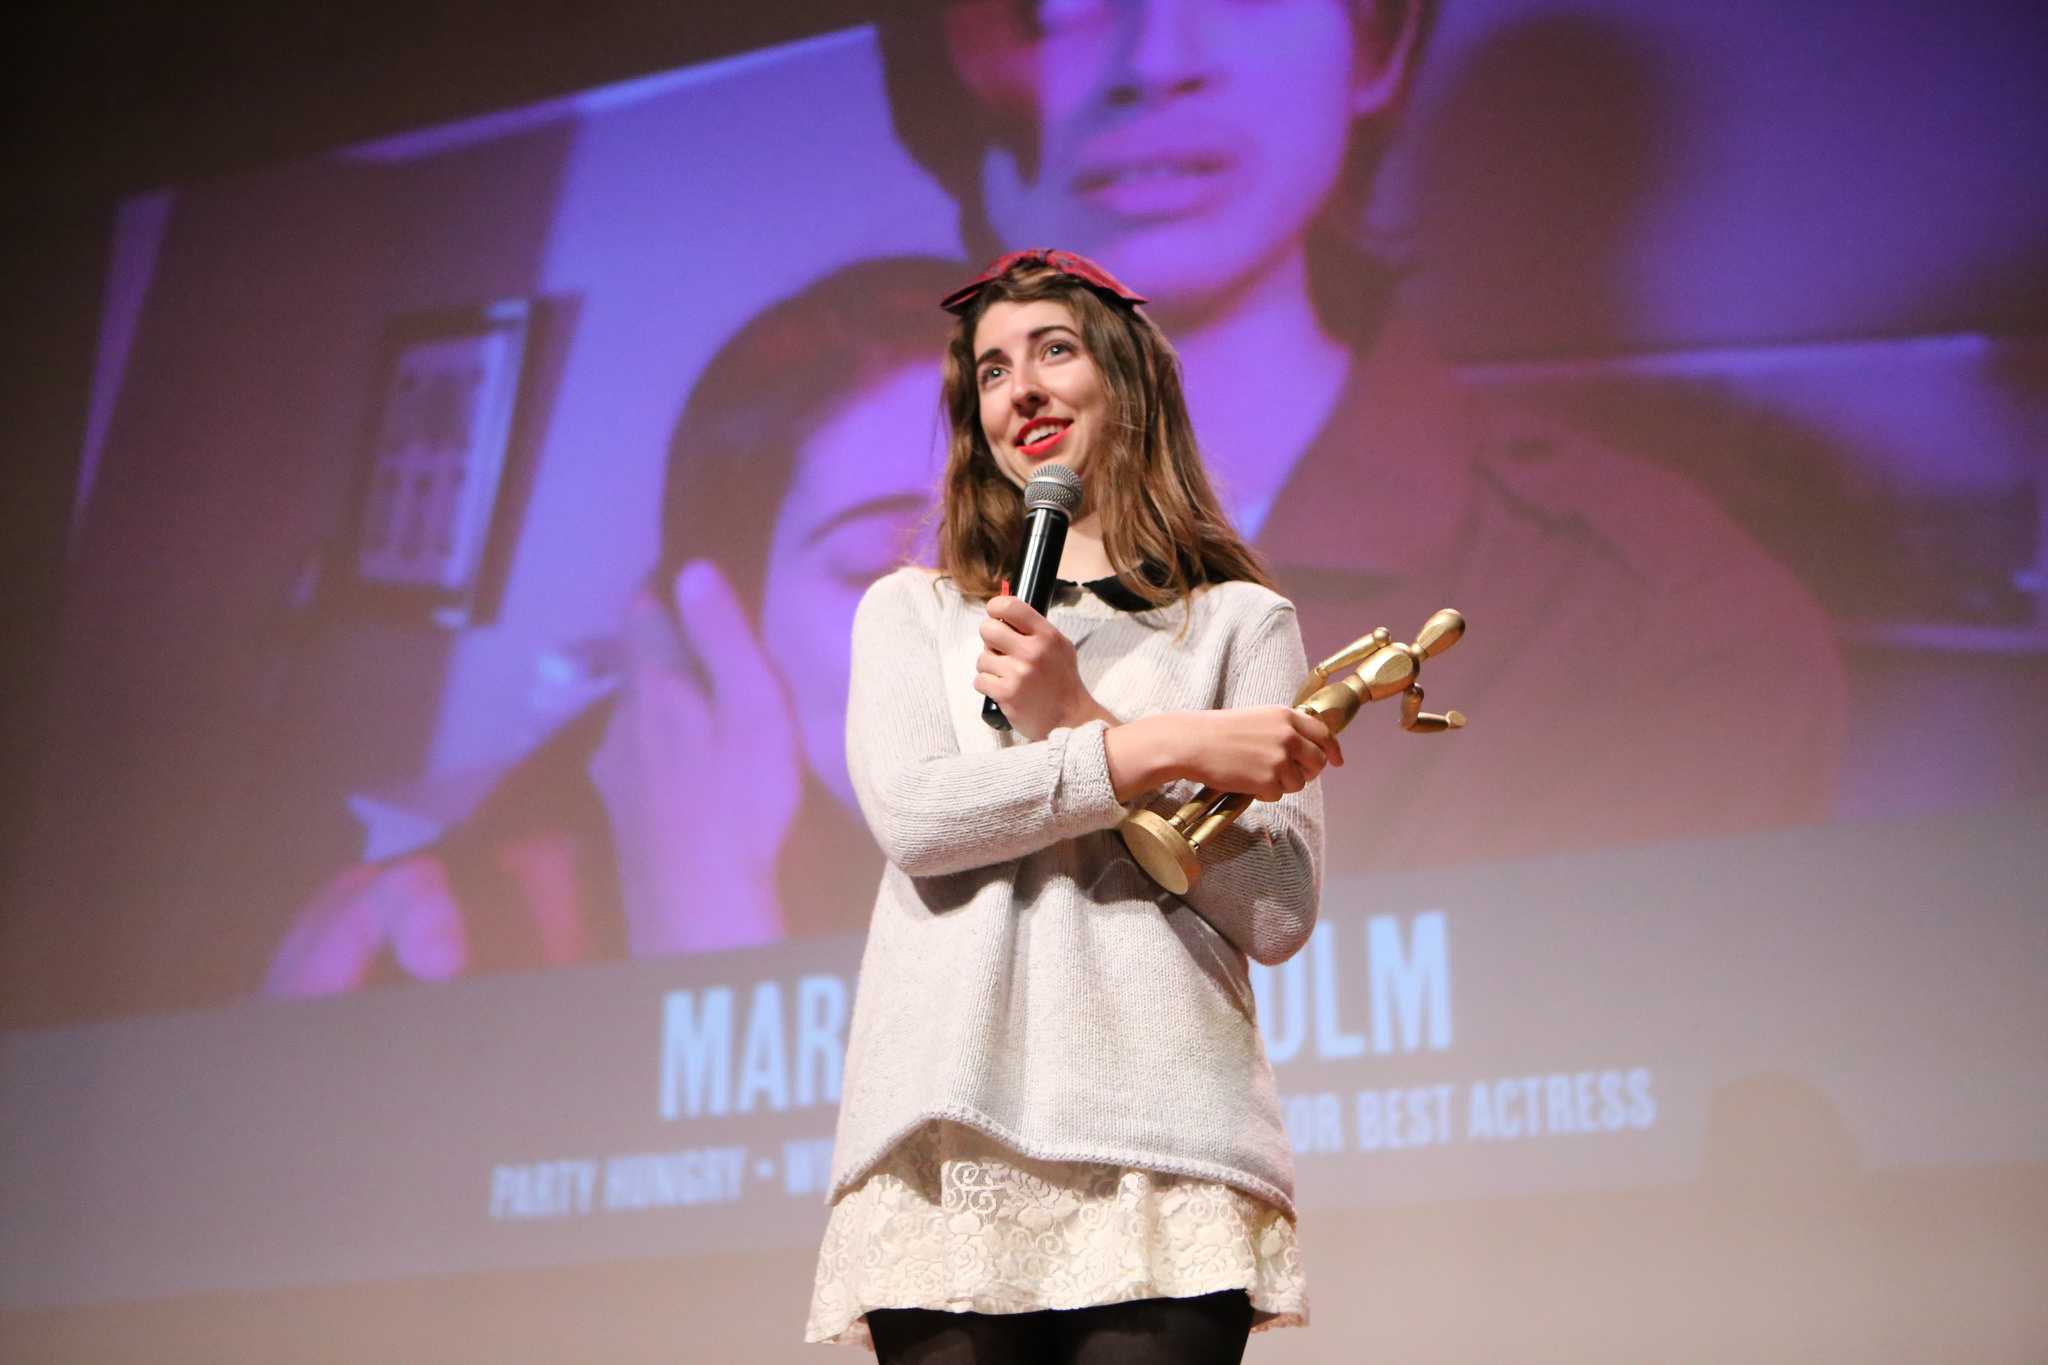 Marian McColm, a senior cinema major, receives the Silver Tripod for Best Actress award for her role in Party Hungry during the Campus MovieFest Finale in Jack Adams Hall at SF State on Thursday October 15, 2015. (Joel Angel Juárez / Xpress)